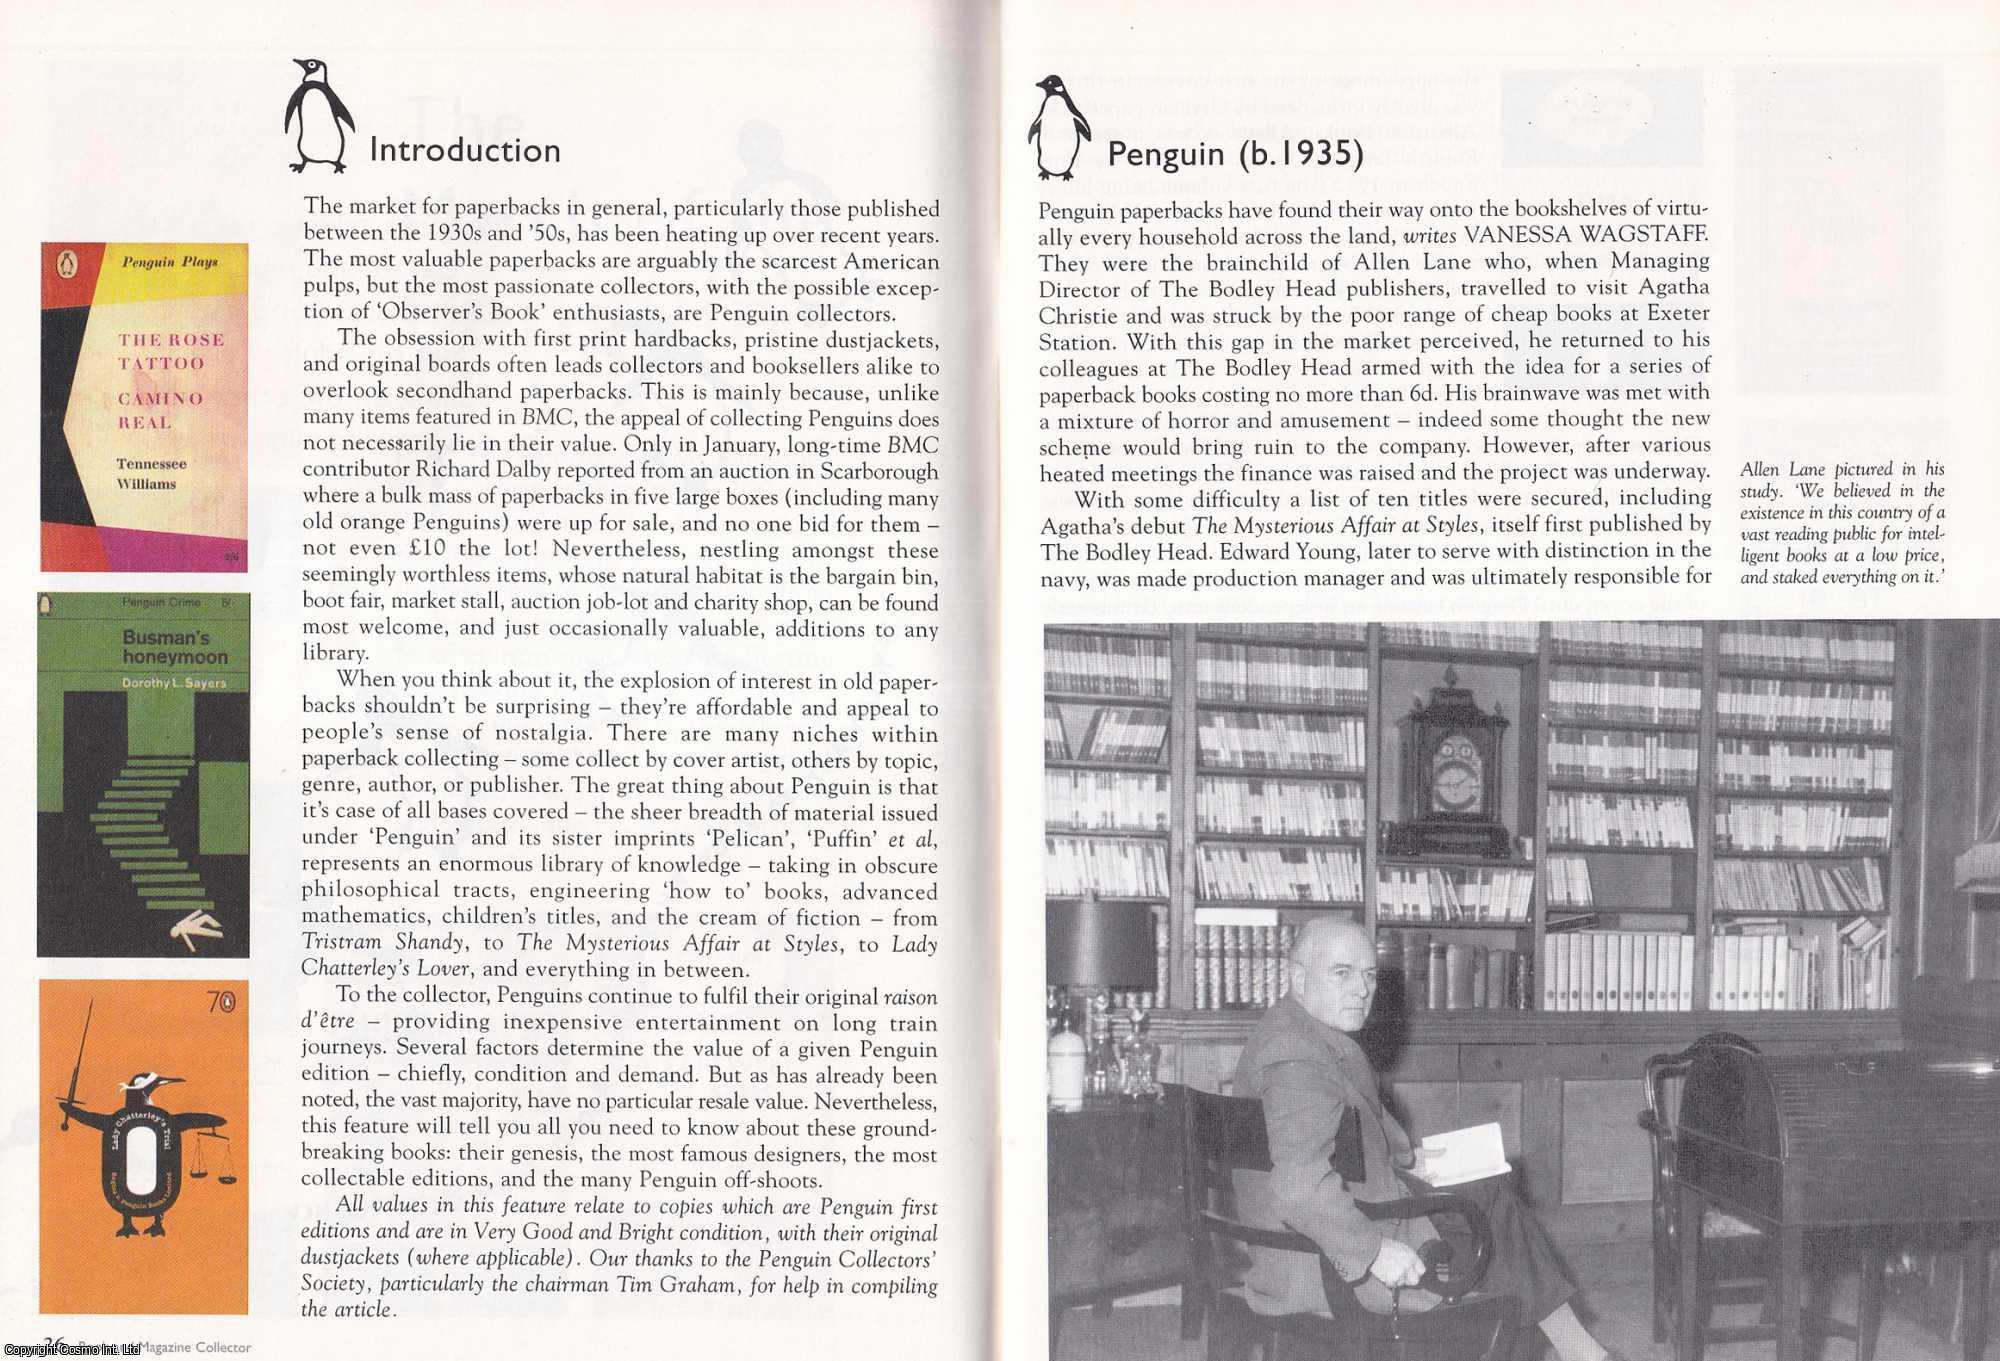 Unstated - The March of The Penguins (penguin books). This is an original article separated from an issue of The Book & Magazine Collector publication.